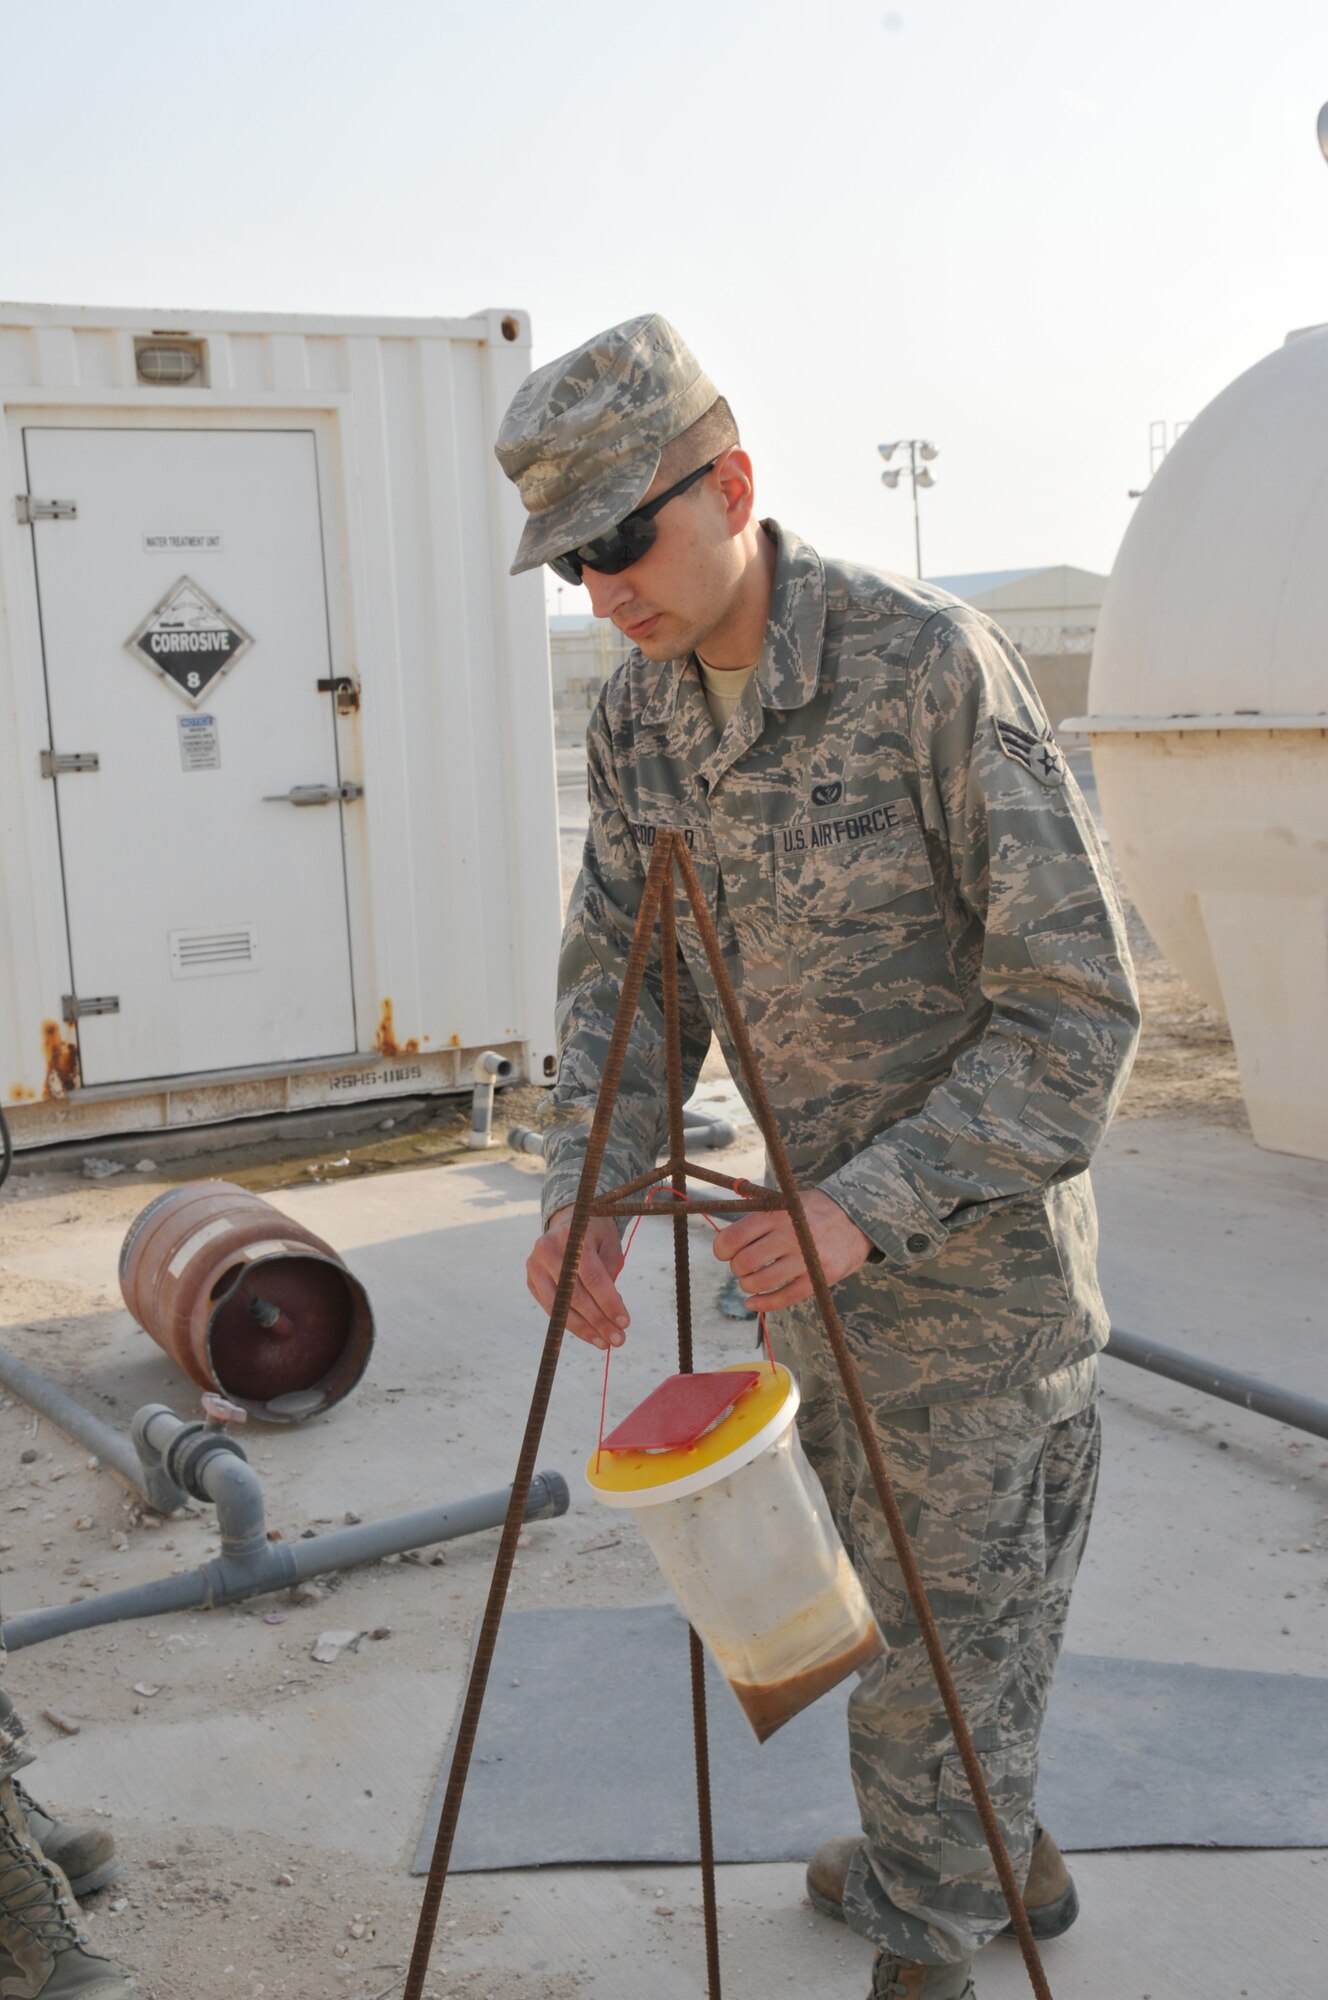 Senior Airman Jonathan McDonald, 379th Expeditionary Civil Engineer Squadron pest management technician, checks a fly trap Feb. 8 at Al Udeid Air Base, Qatar. Fly traps are placed outside each dining facility to control fly pestilence. (U.S. Air Force photo by Tech. Sgt. Terrica Y. Jones/Released)